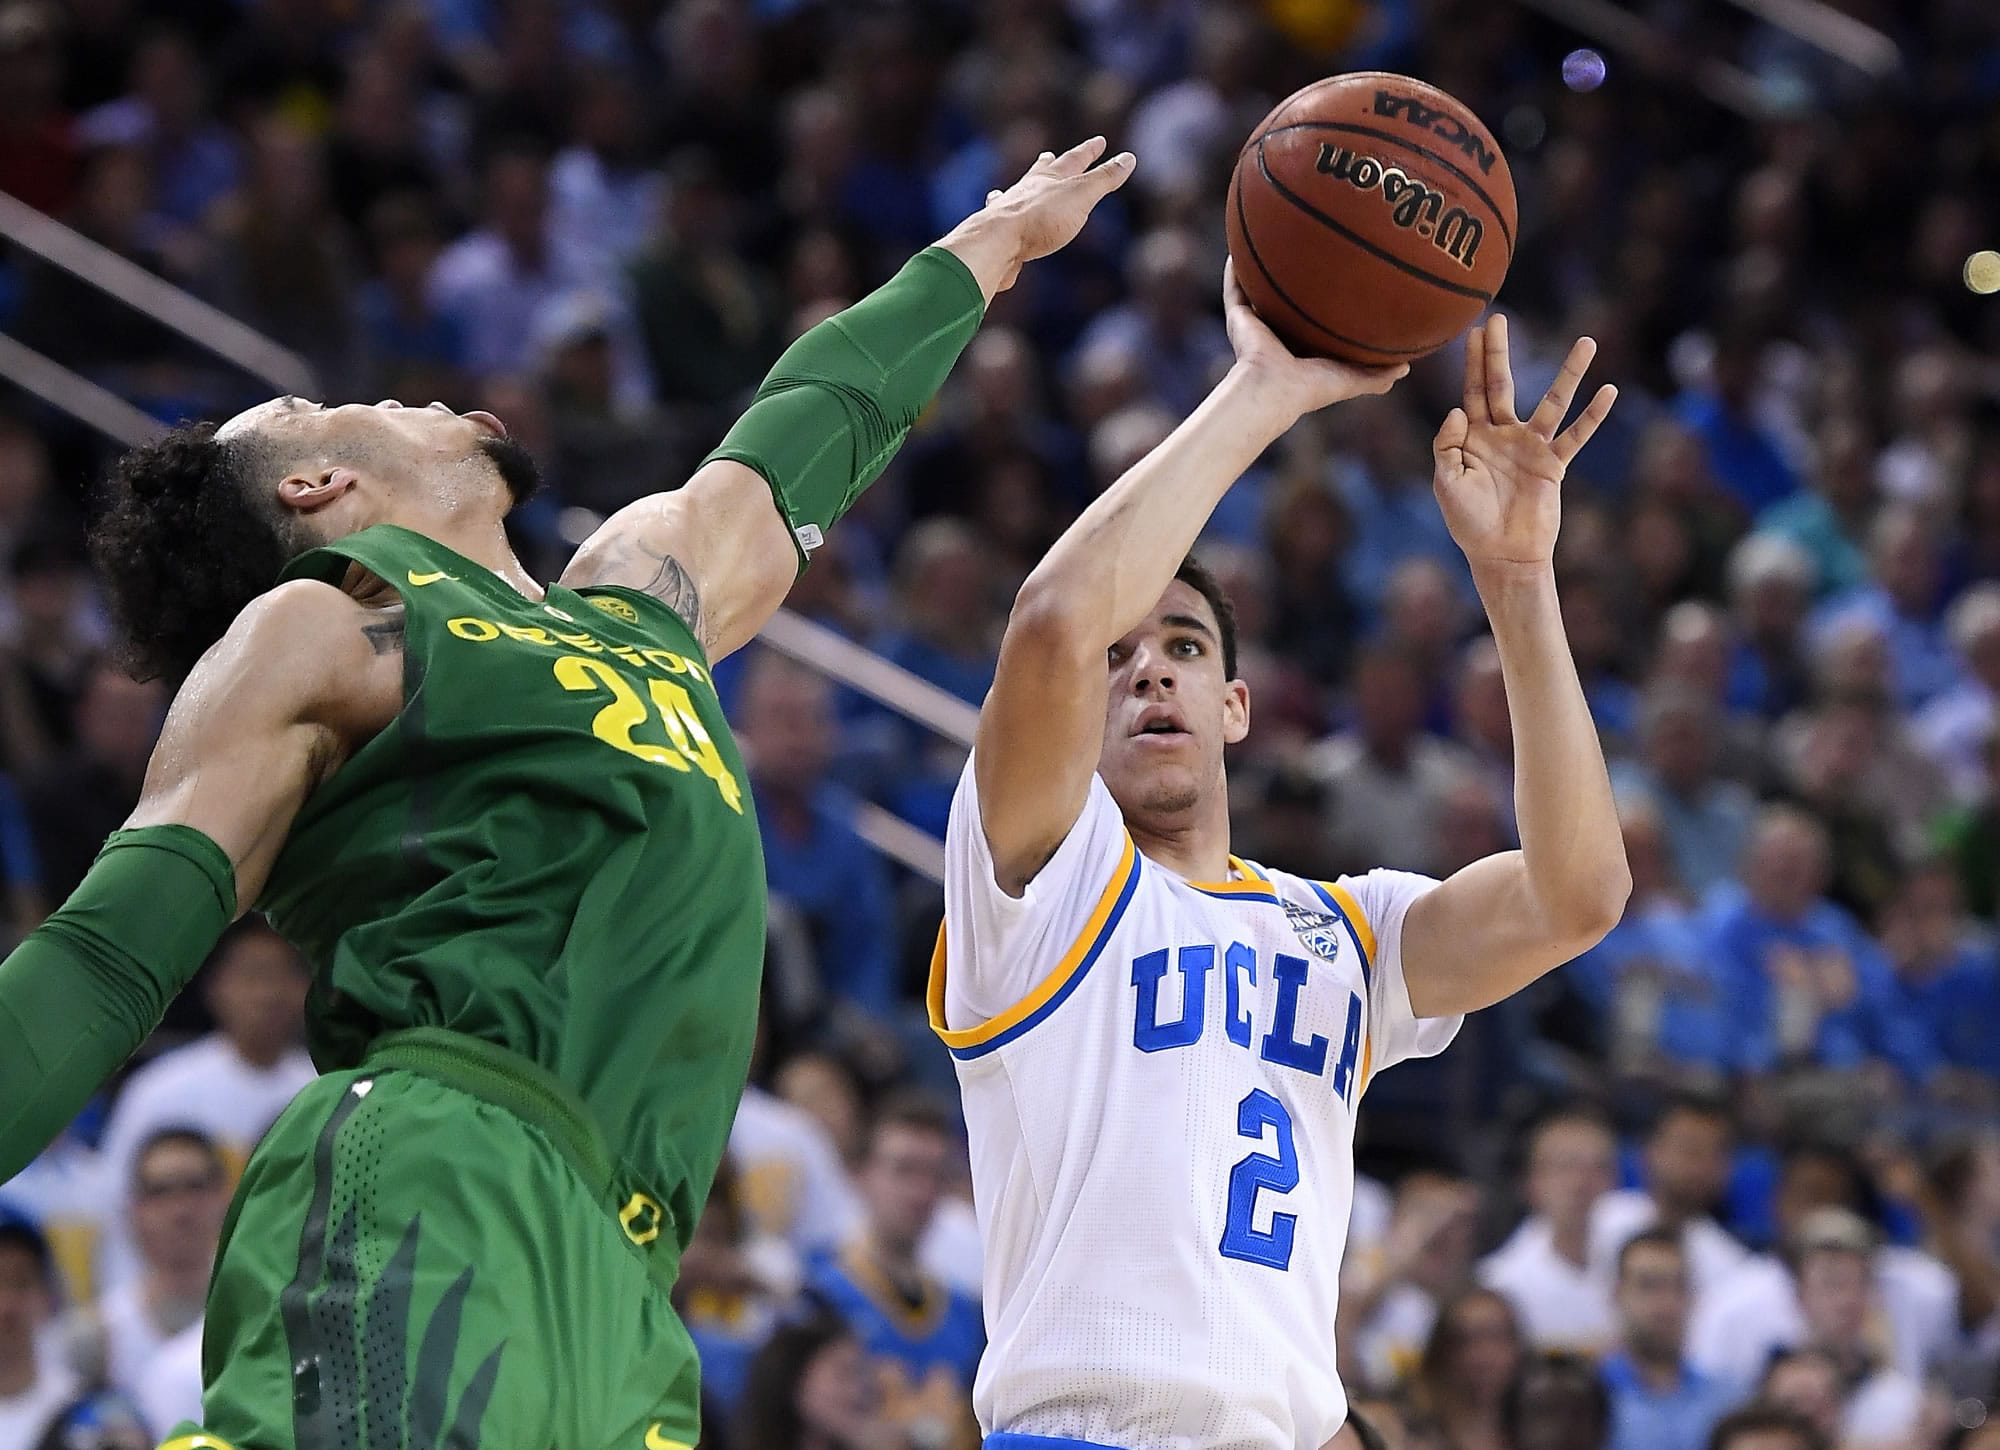 UCLA guard Lonzo Ball, right, shoots as Oregon forward Dillon Brooks defends during the second half of an NCAA college basketball game, Thursday, Feb. 9, 2017, in Los Angeles. UCLA won 82-79. (AP Photo/Mark J.